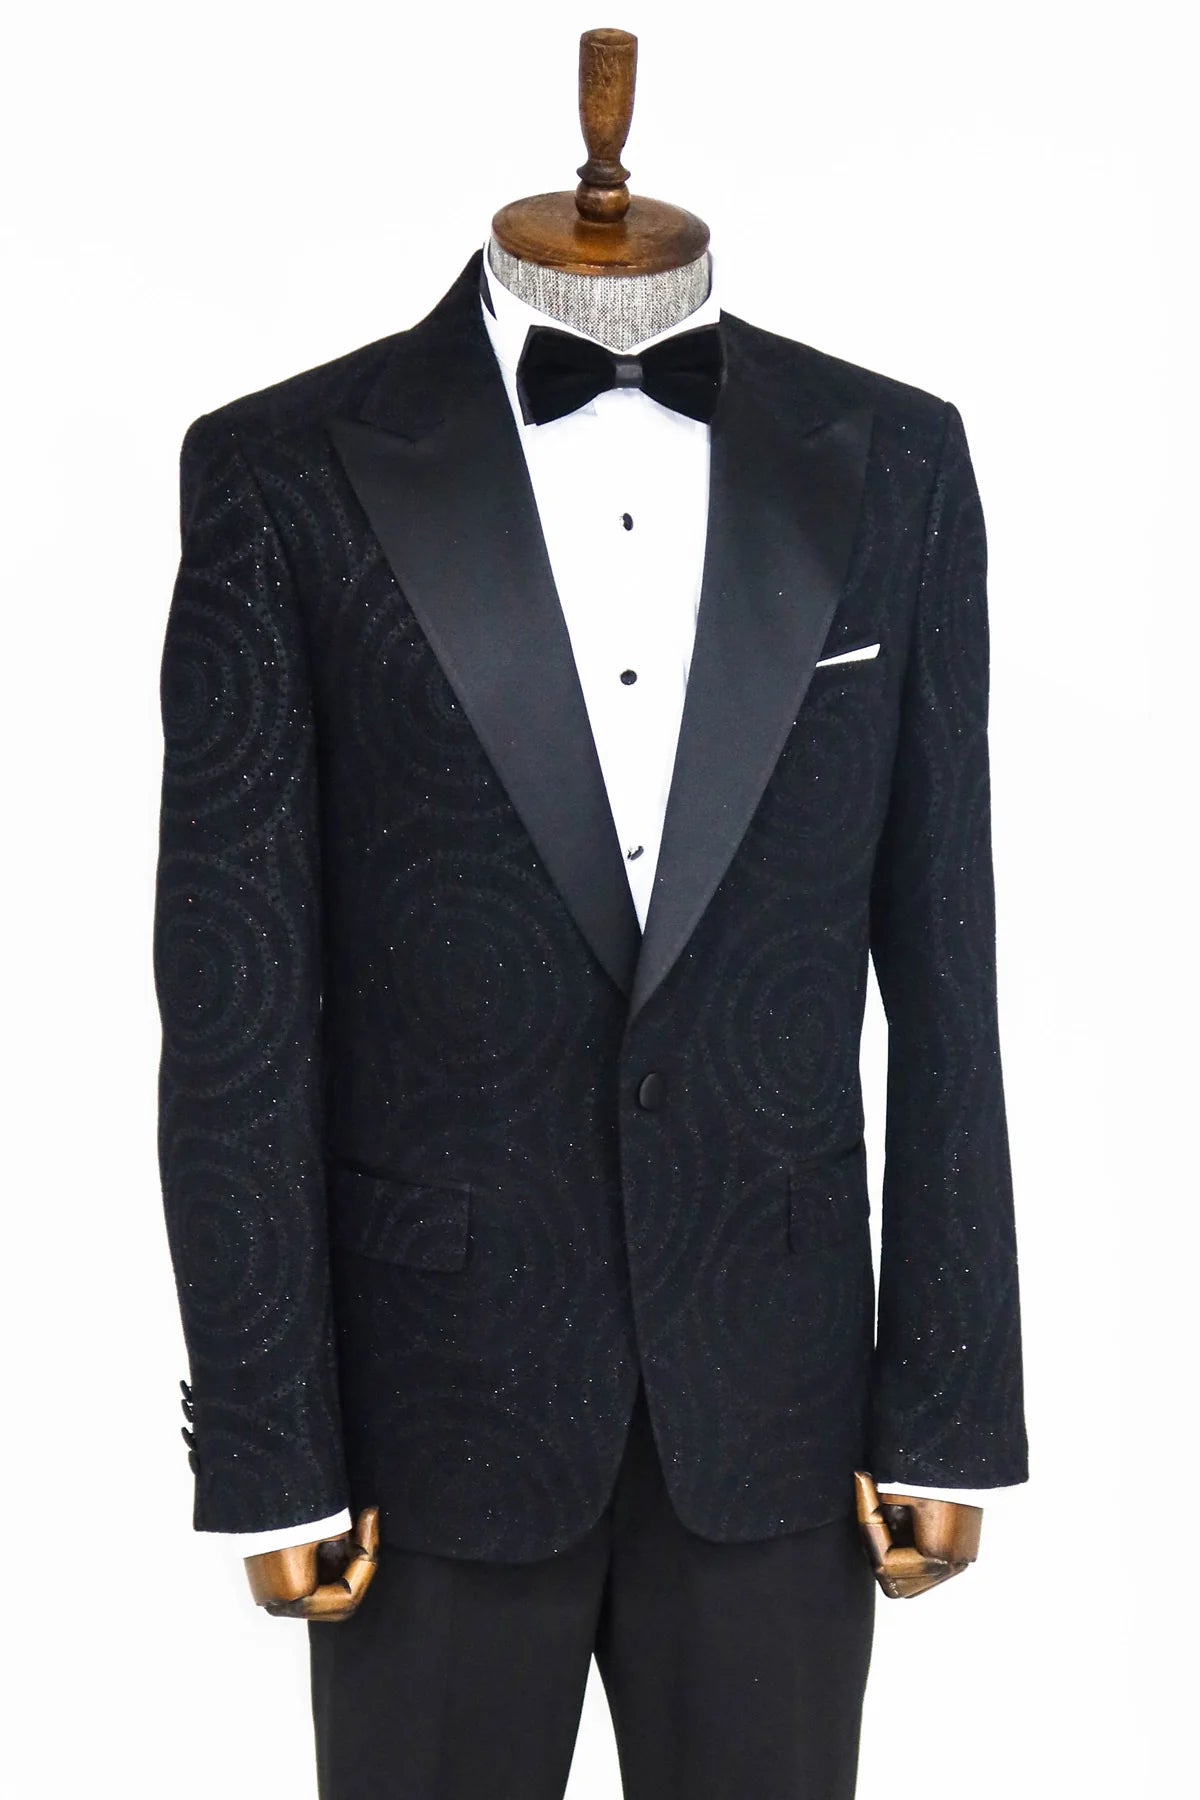 Hypnose Pattern Peak Lapel Slim Fit Black Men Prom Blazer, perfect for proms and other formal events, available exclusively at KCT Menswear.